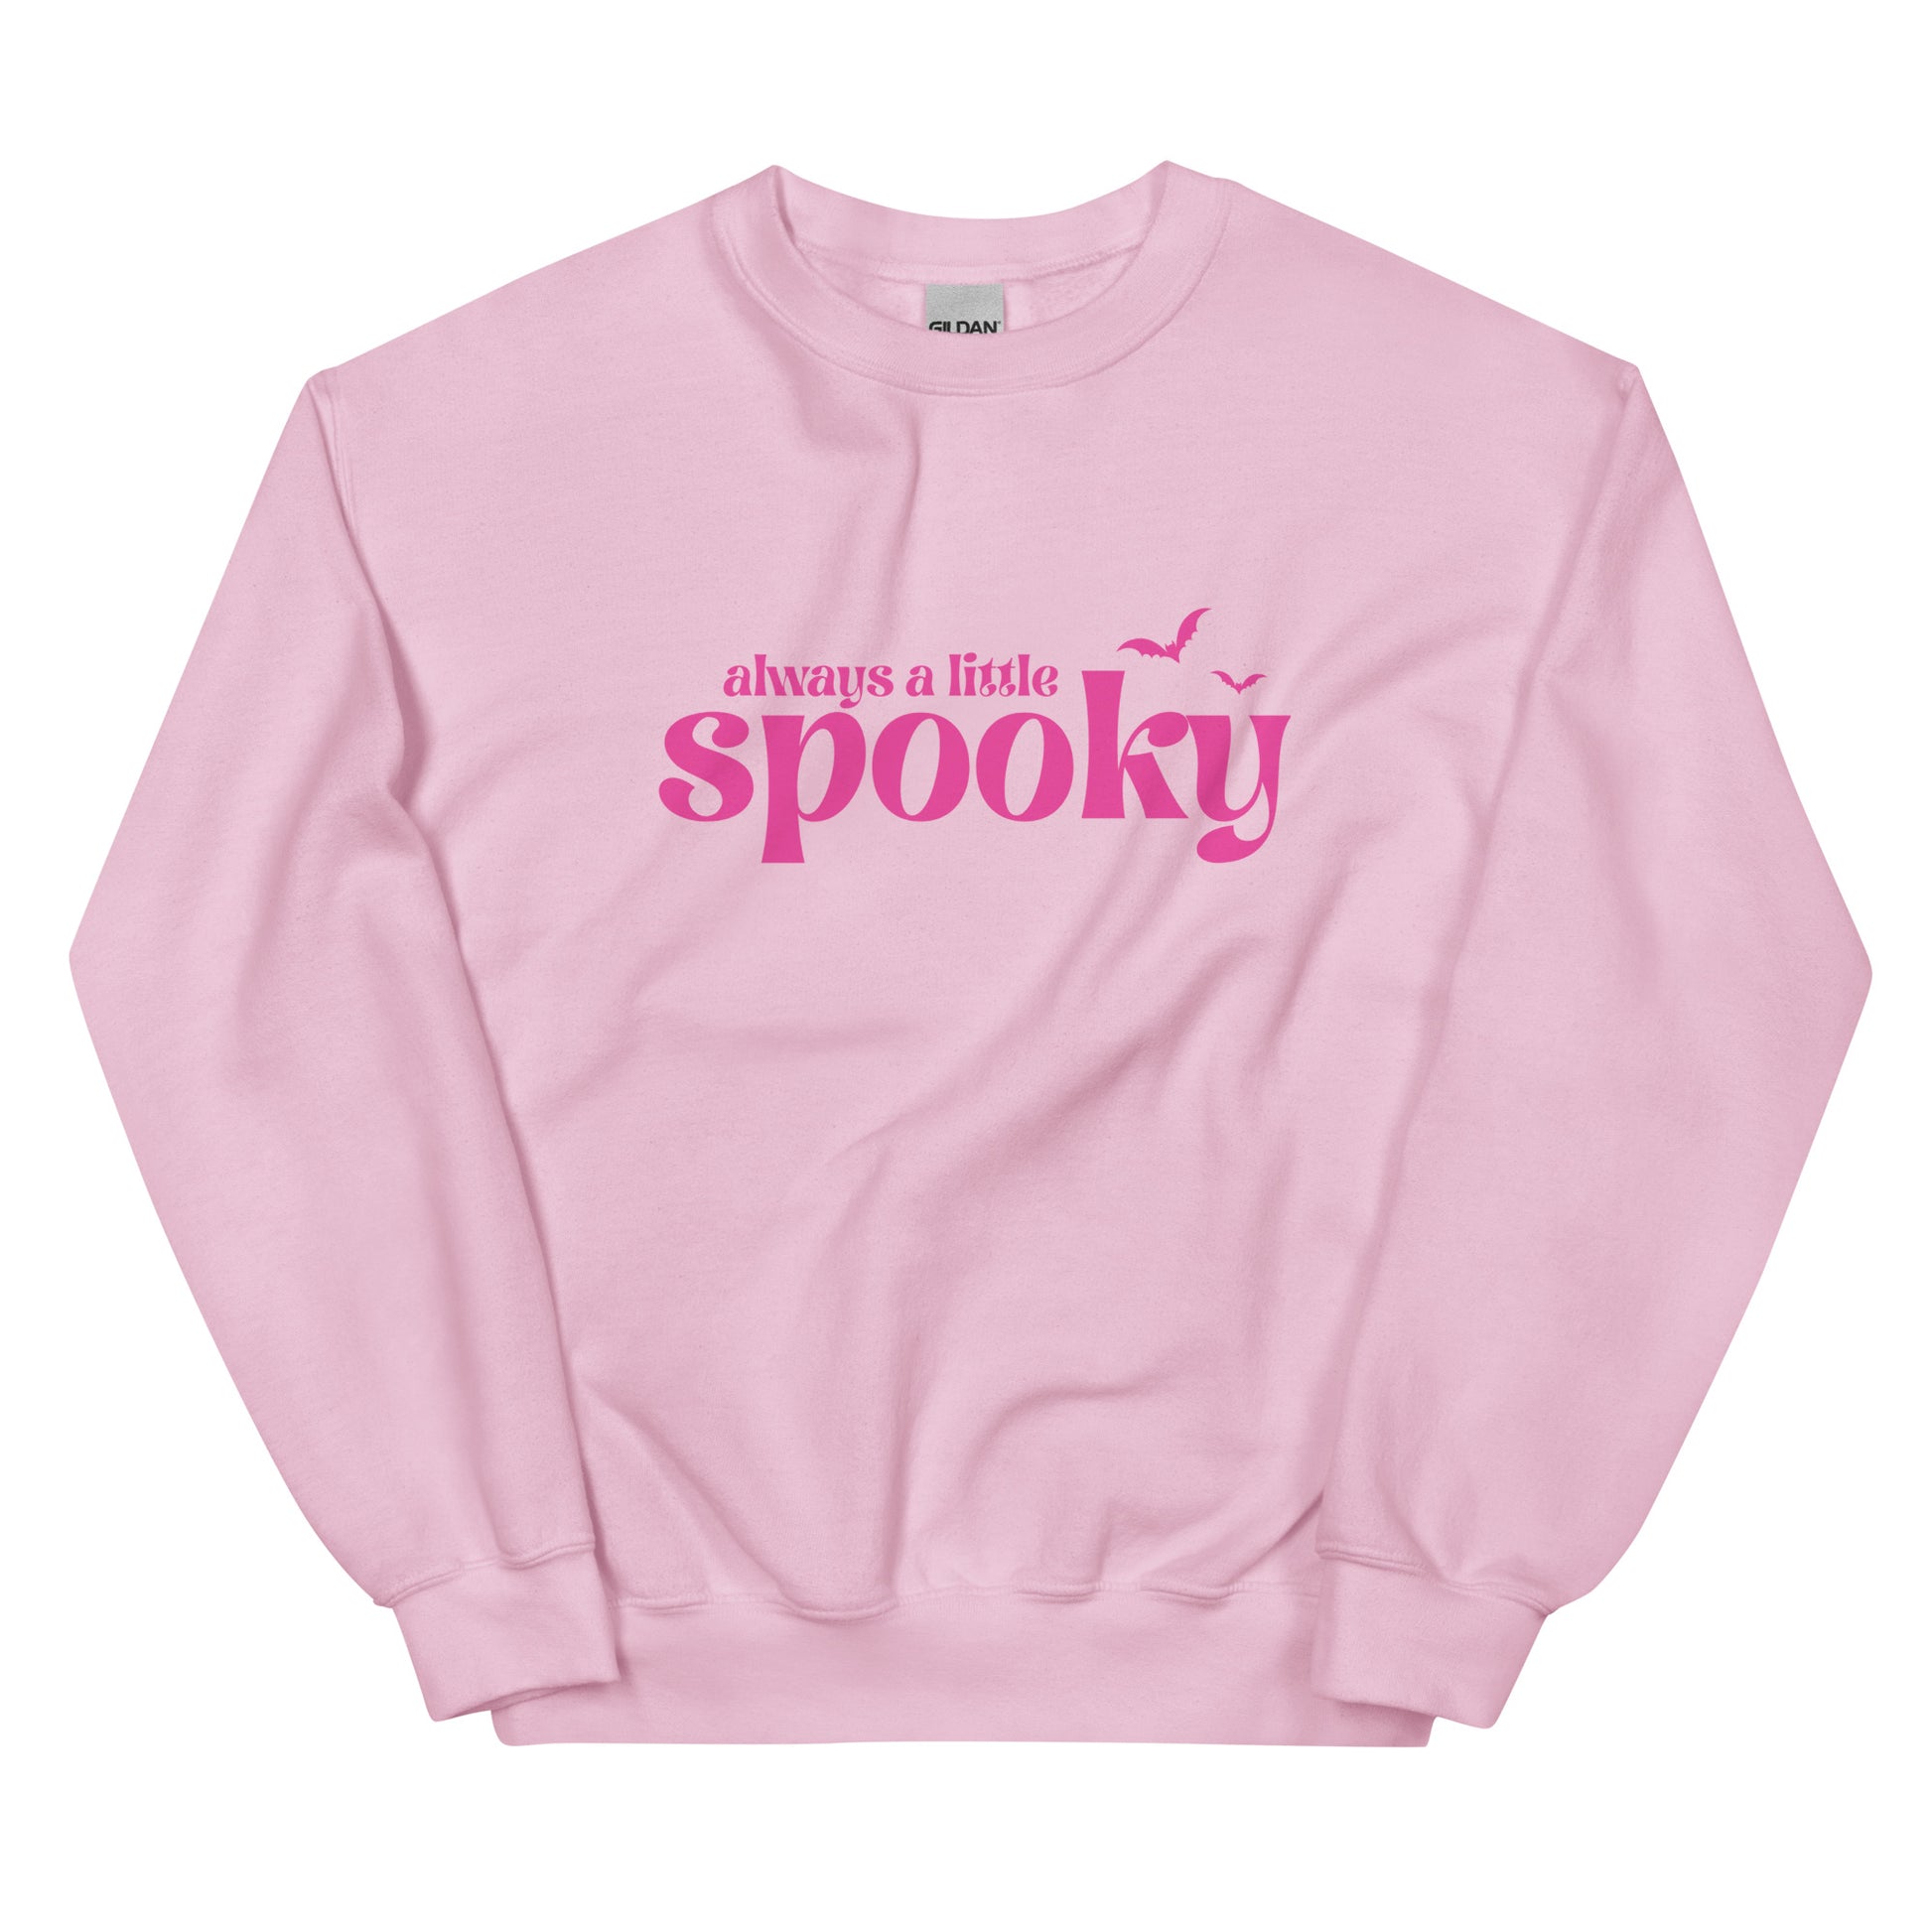 A pink Halloween crewneck sweatshirt that says "always a little spooky" in a trendy, bright pink font